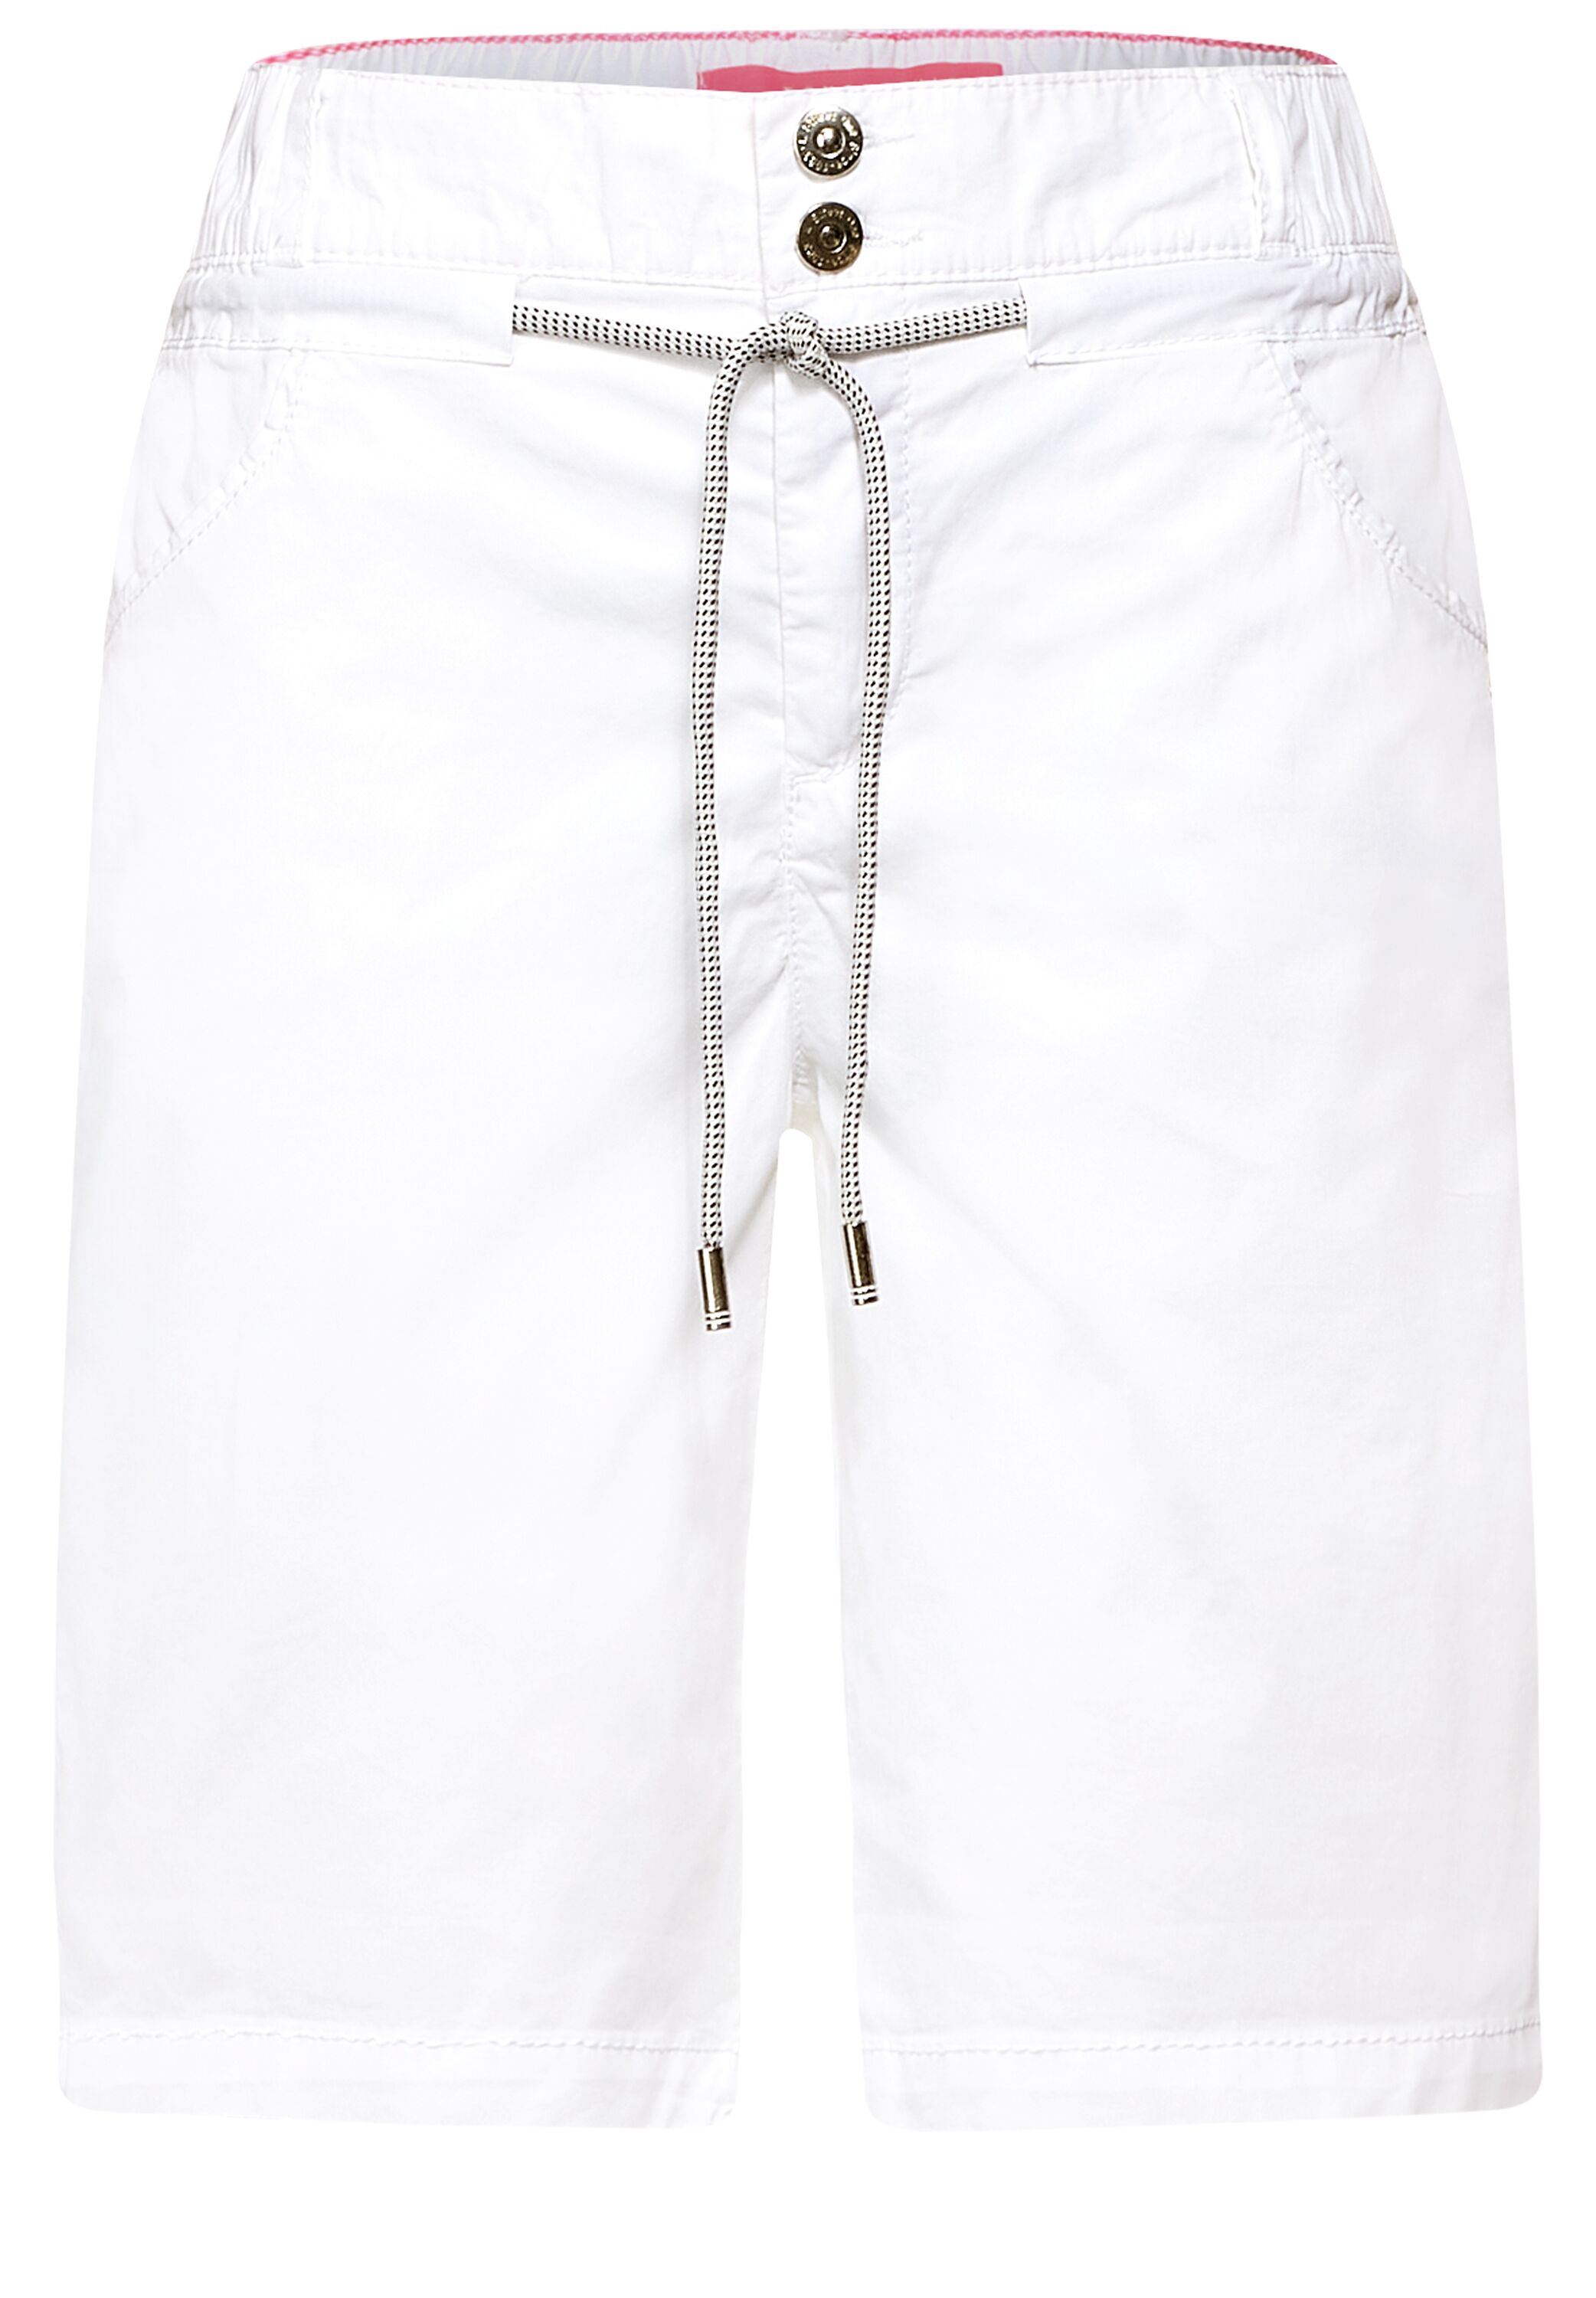 Street White im Bonny - One in CONCEPT Mode A374224-10000 Shorts reduziert SALE